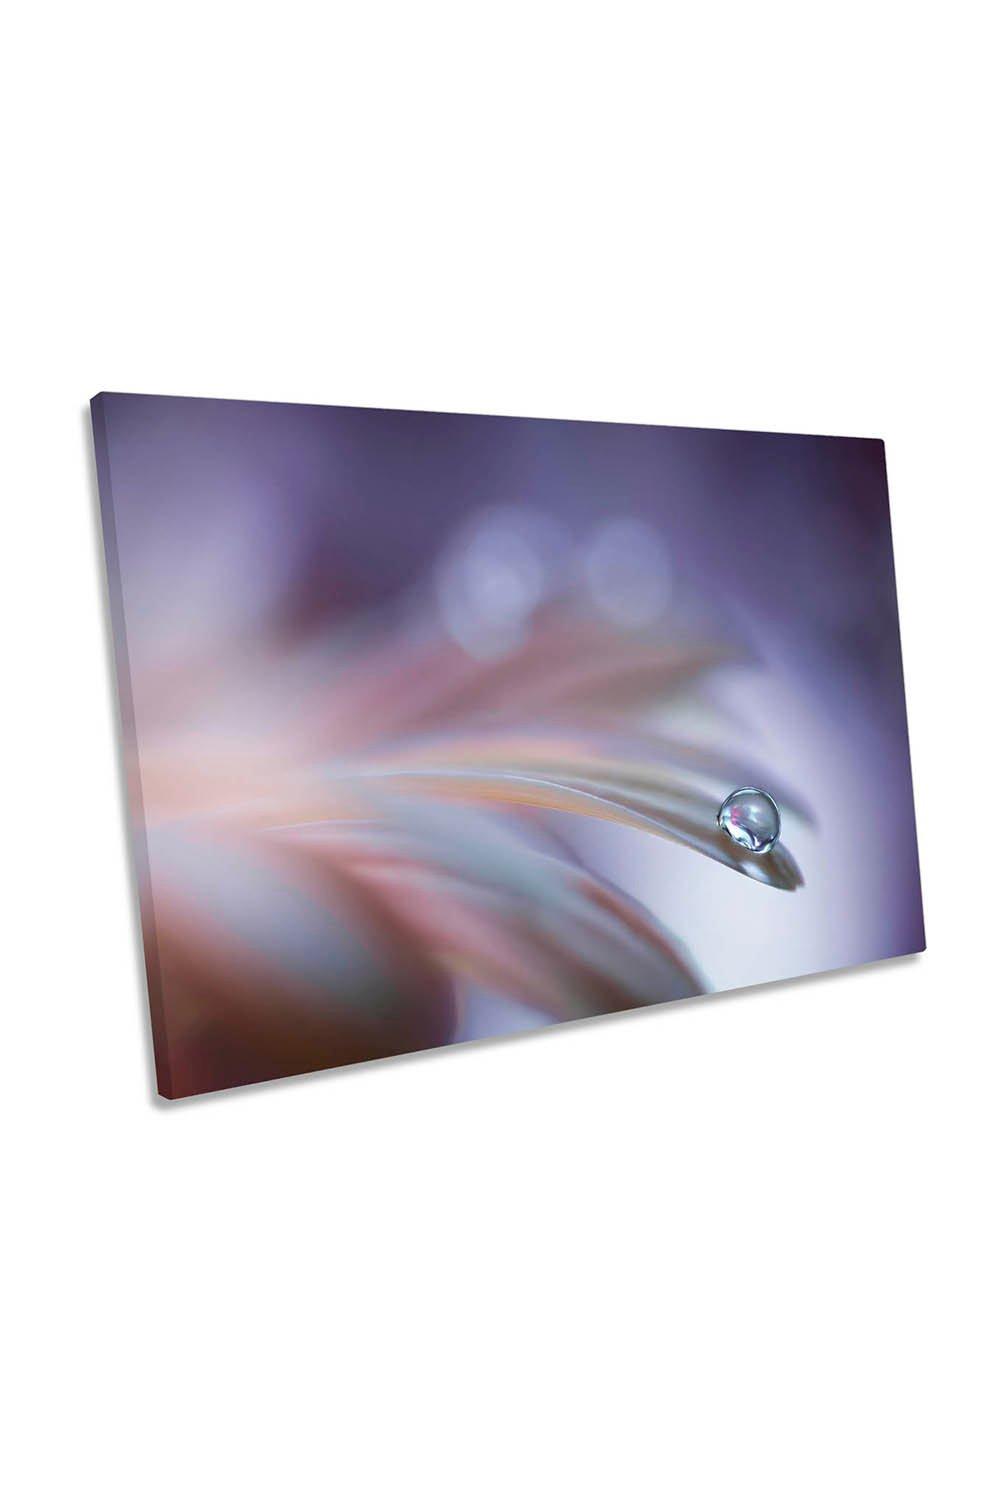 Sound of Soul Petals Water Droplet Canvas Wall Art Picture Print